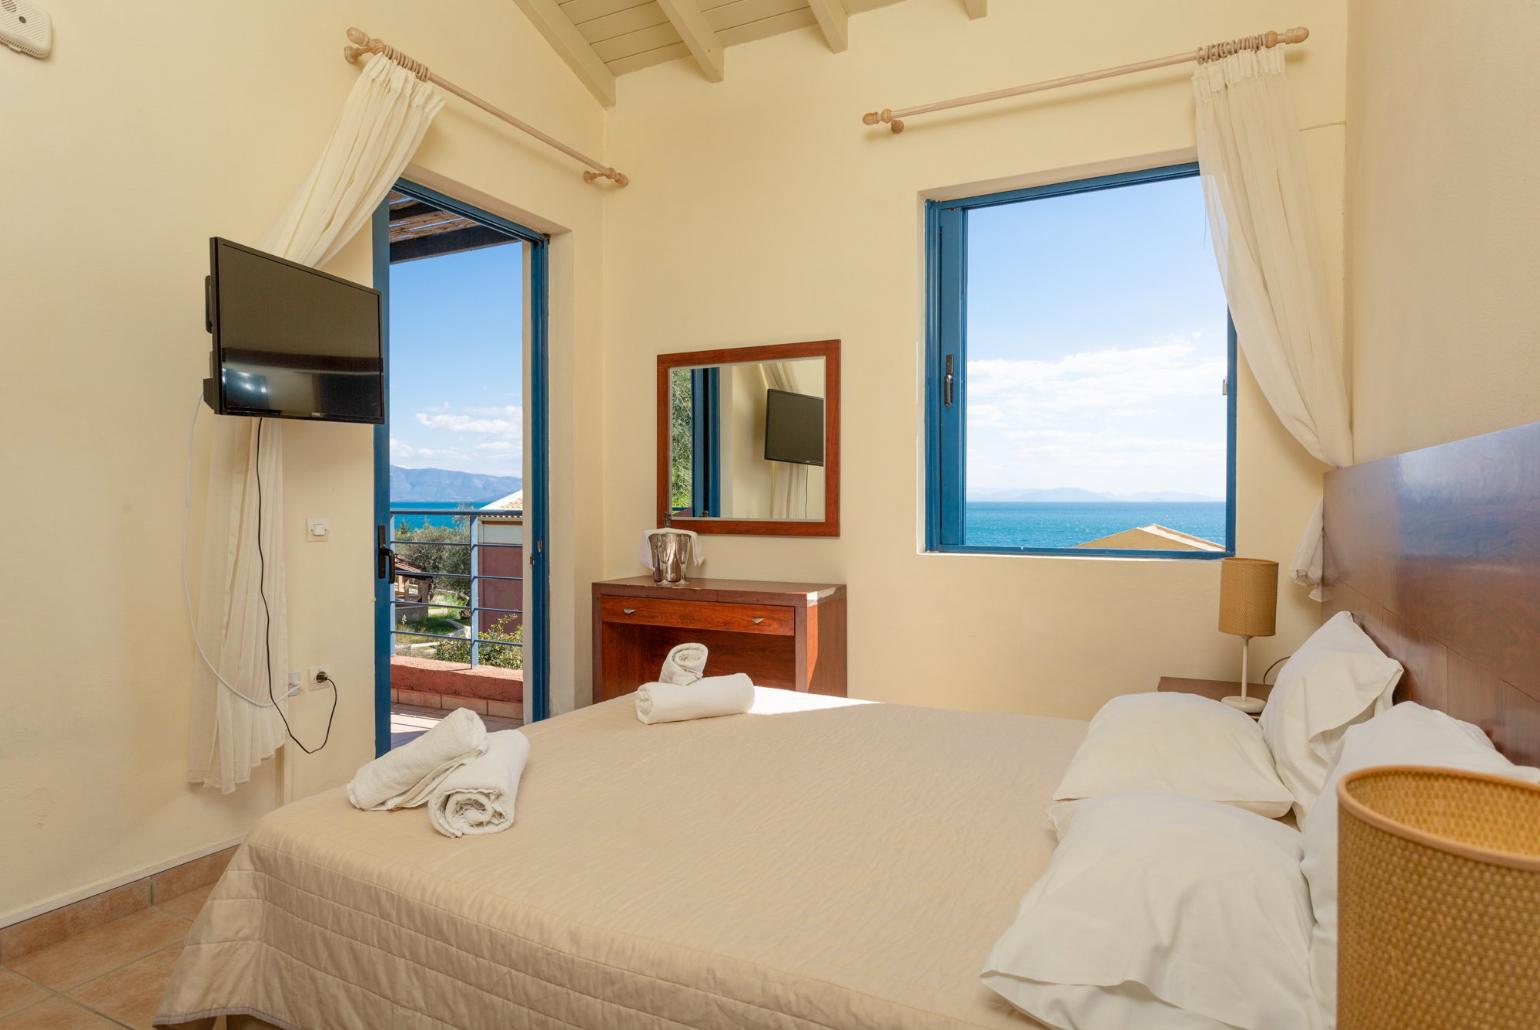 Double bedroom with A/C, TV, and balcony access with sea views